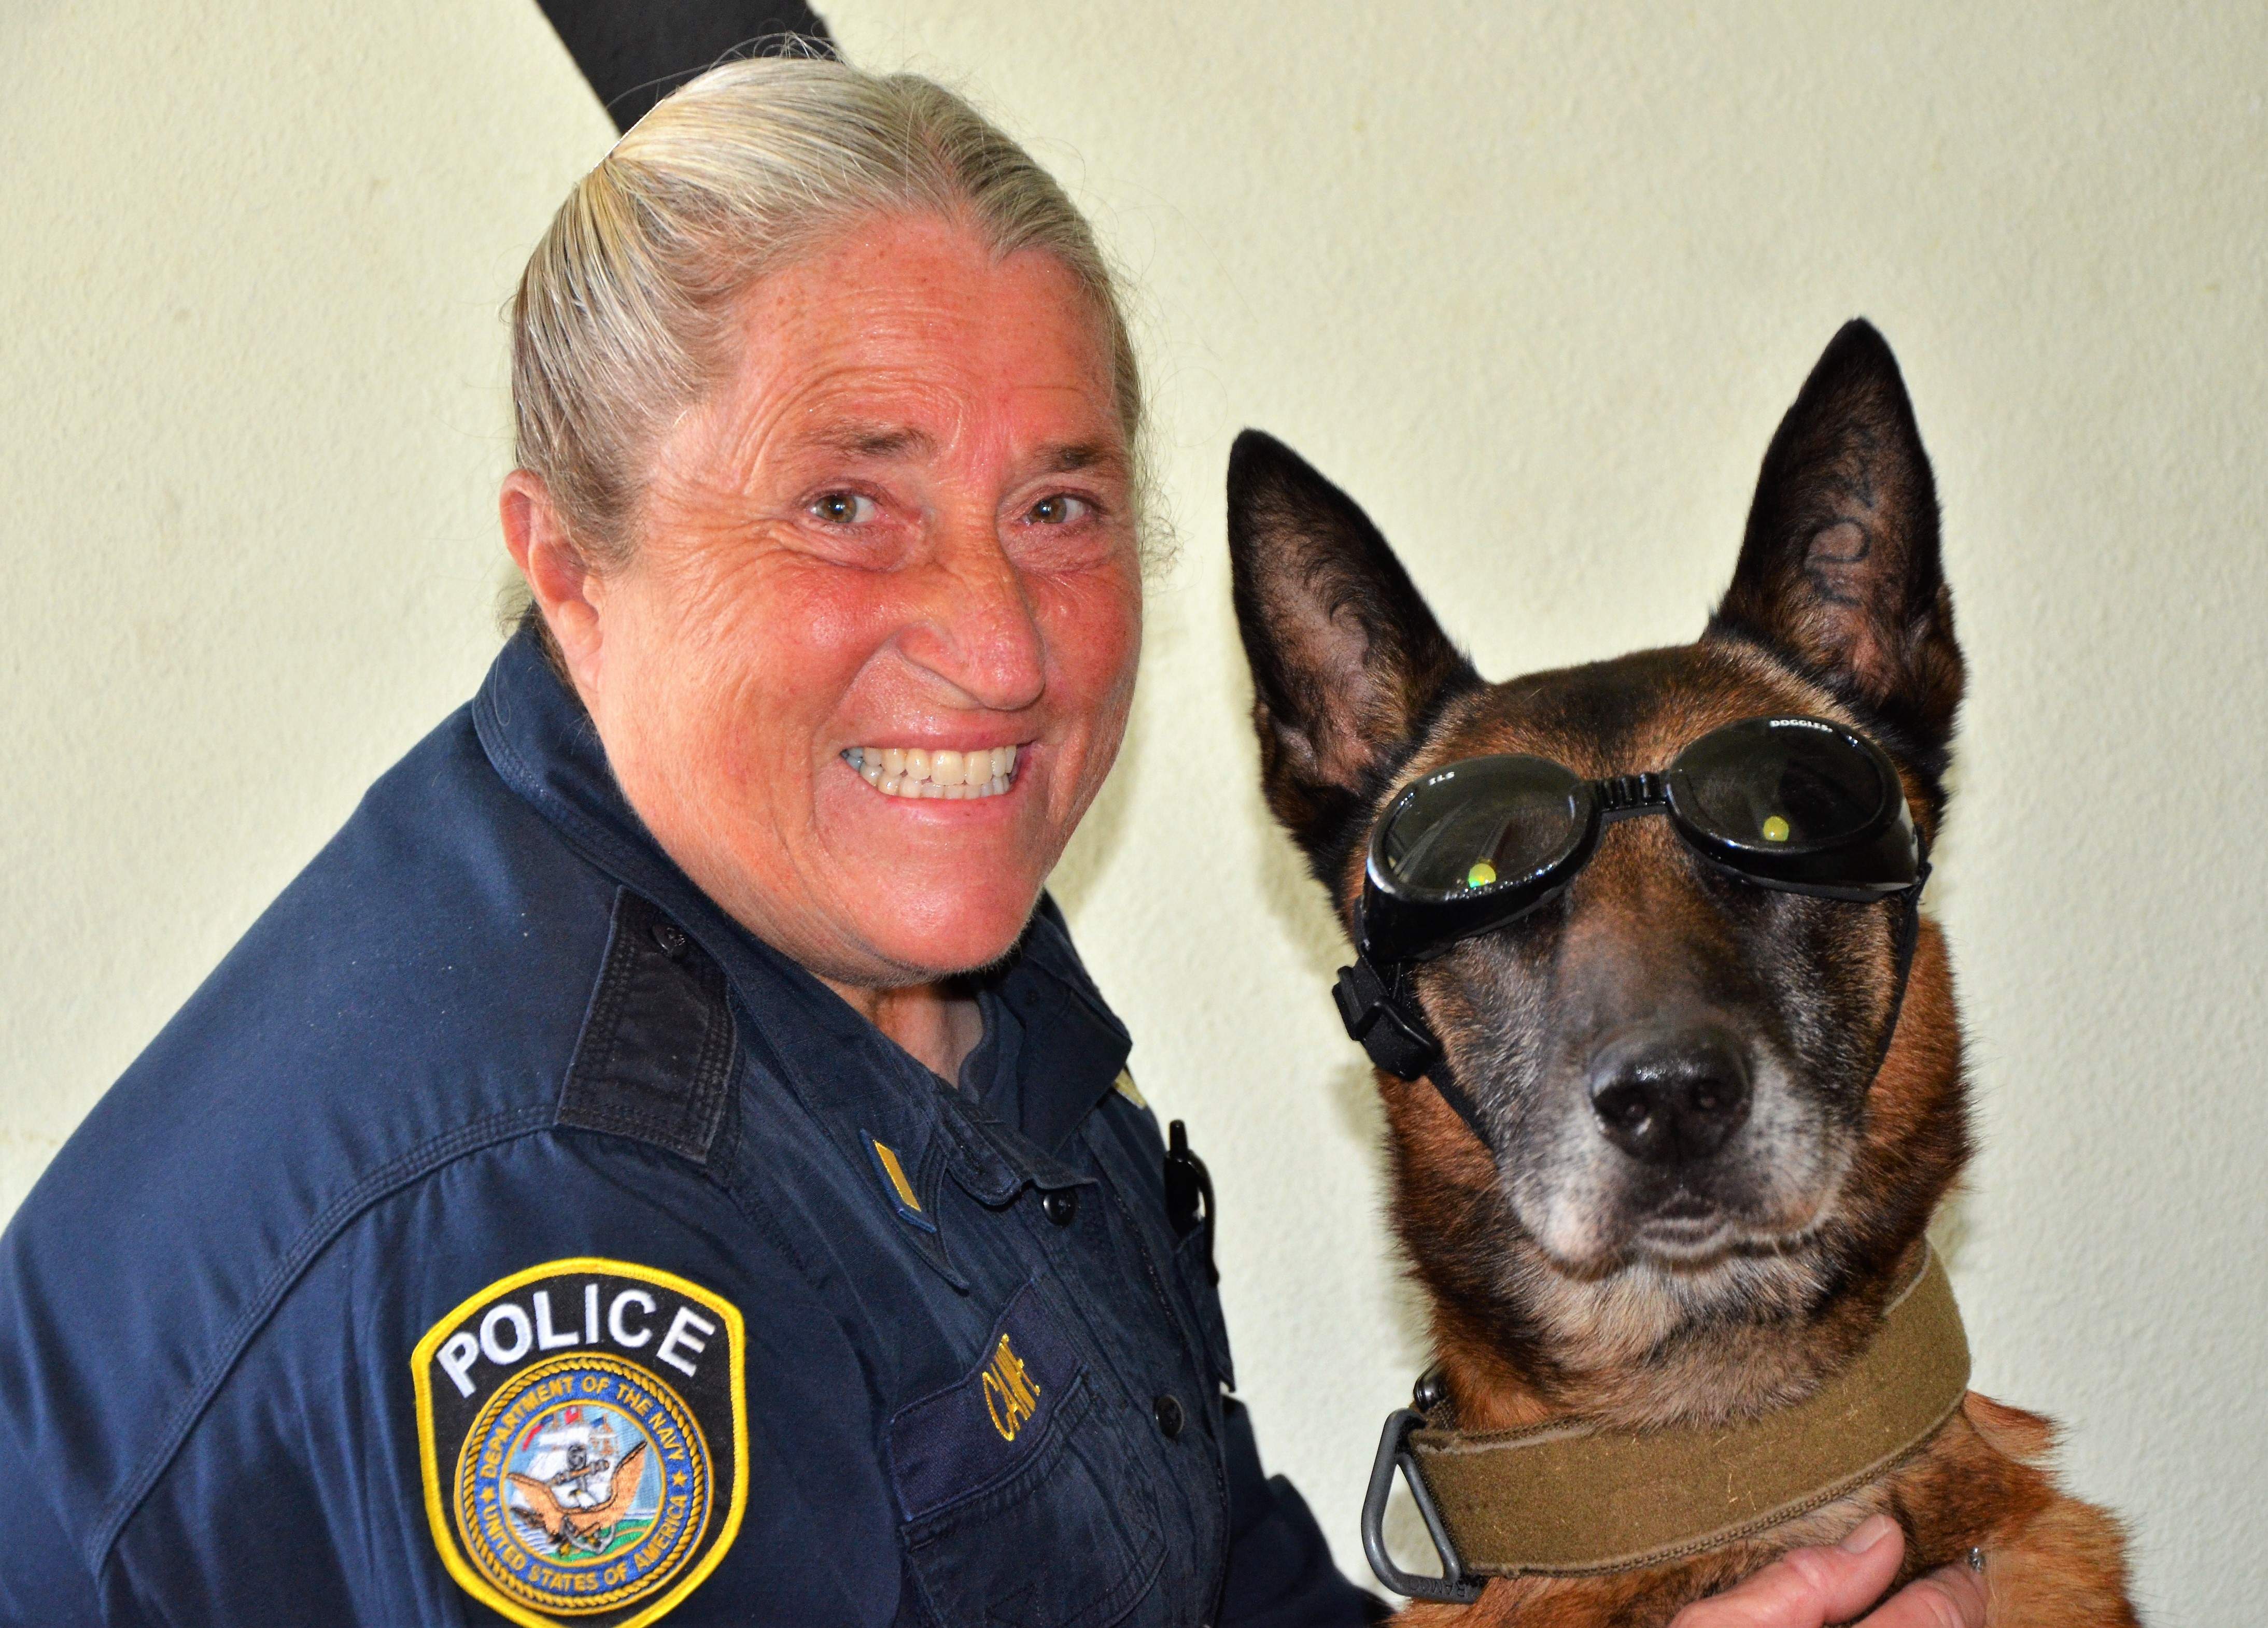 This photo shows Retired Chief Petty Officer Millie Canipe with MWD Rex.